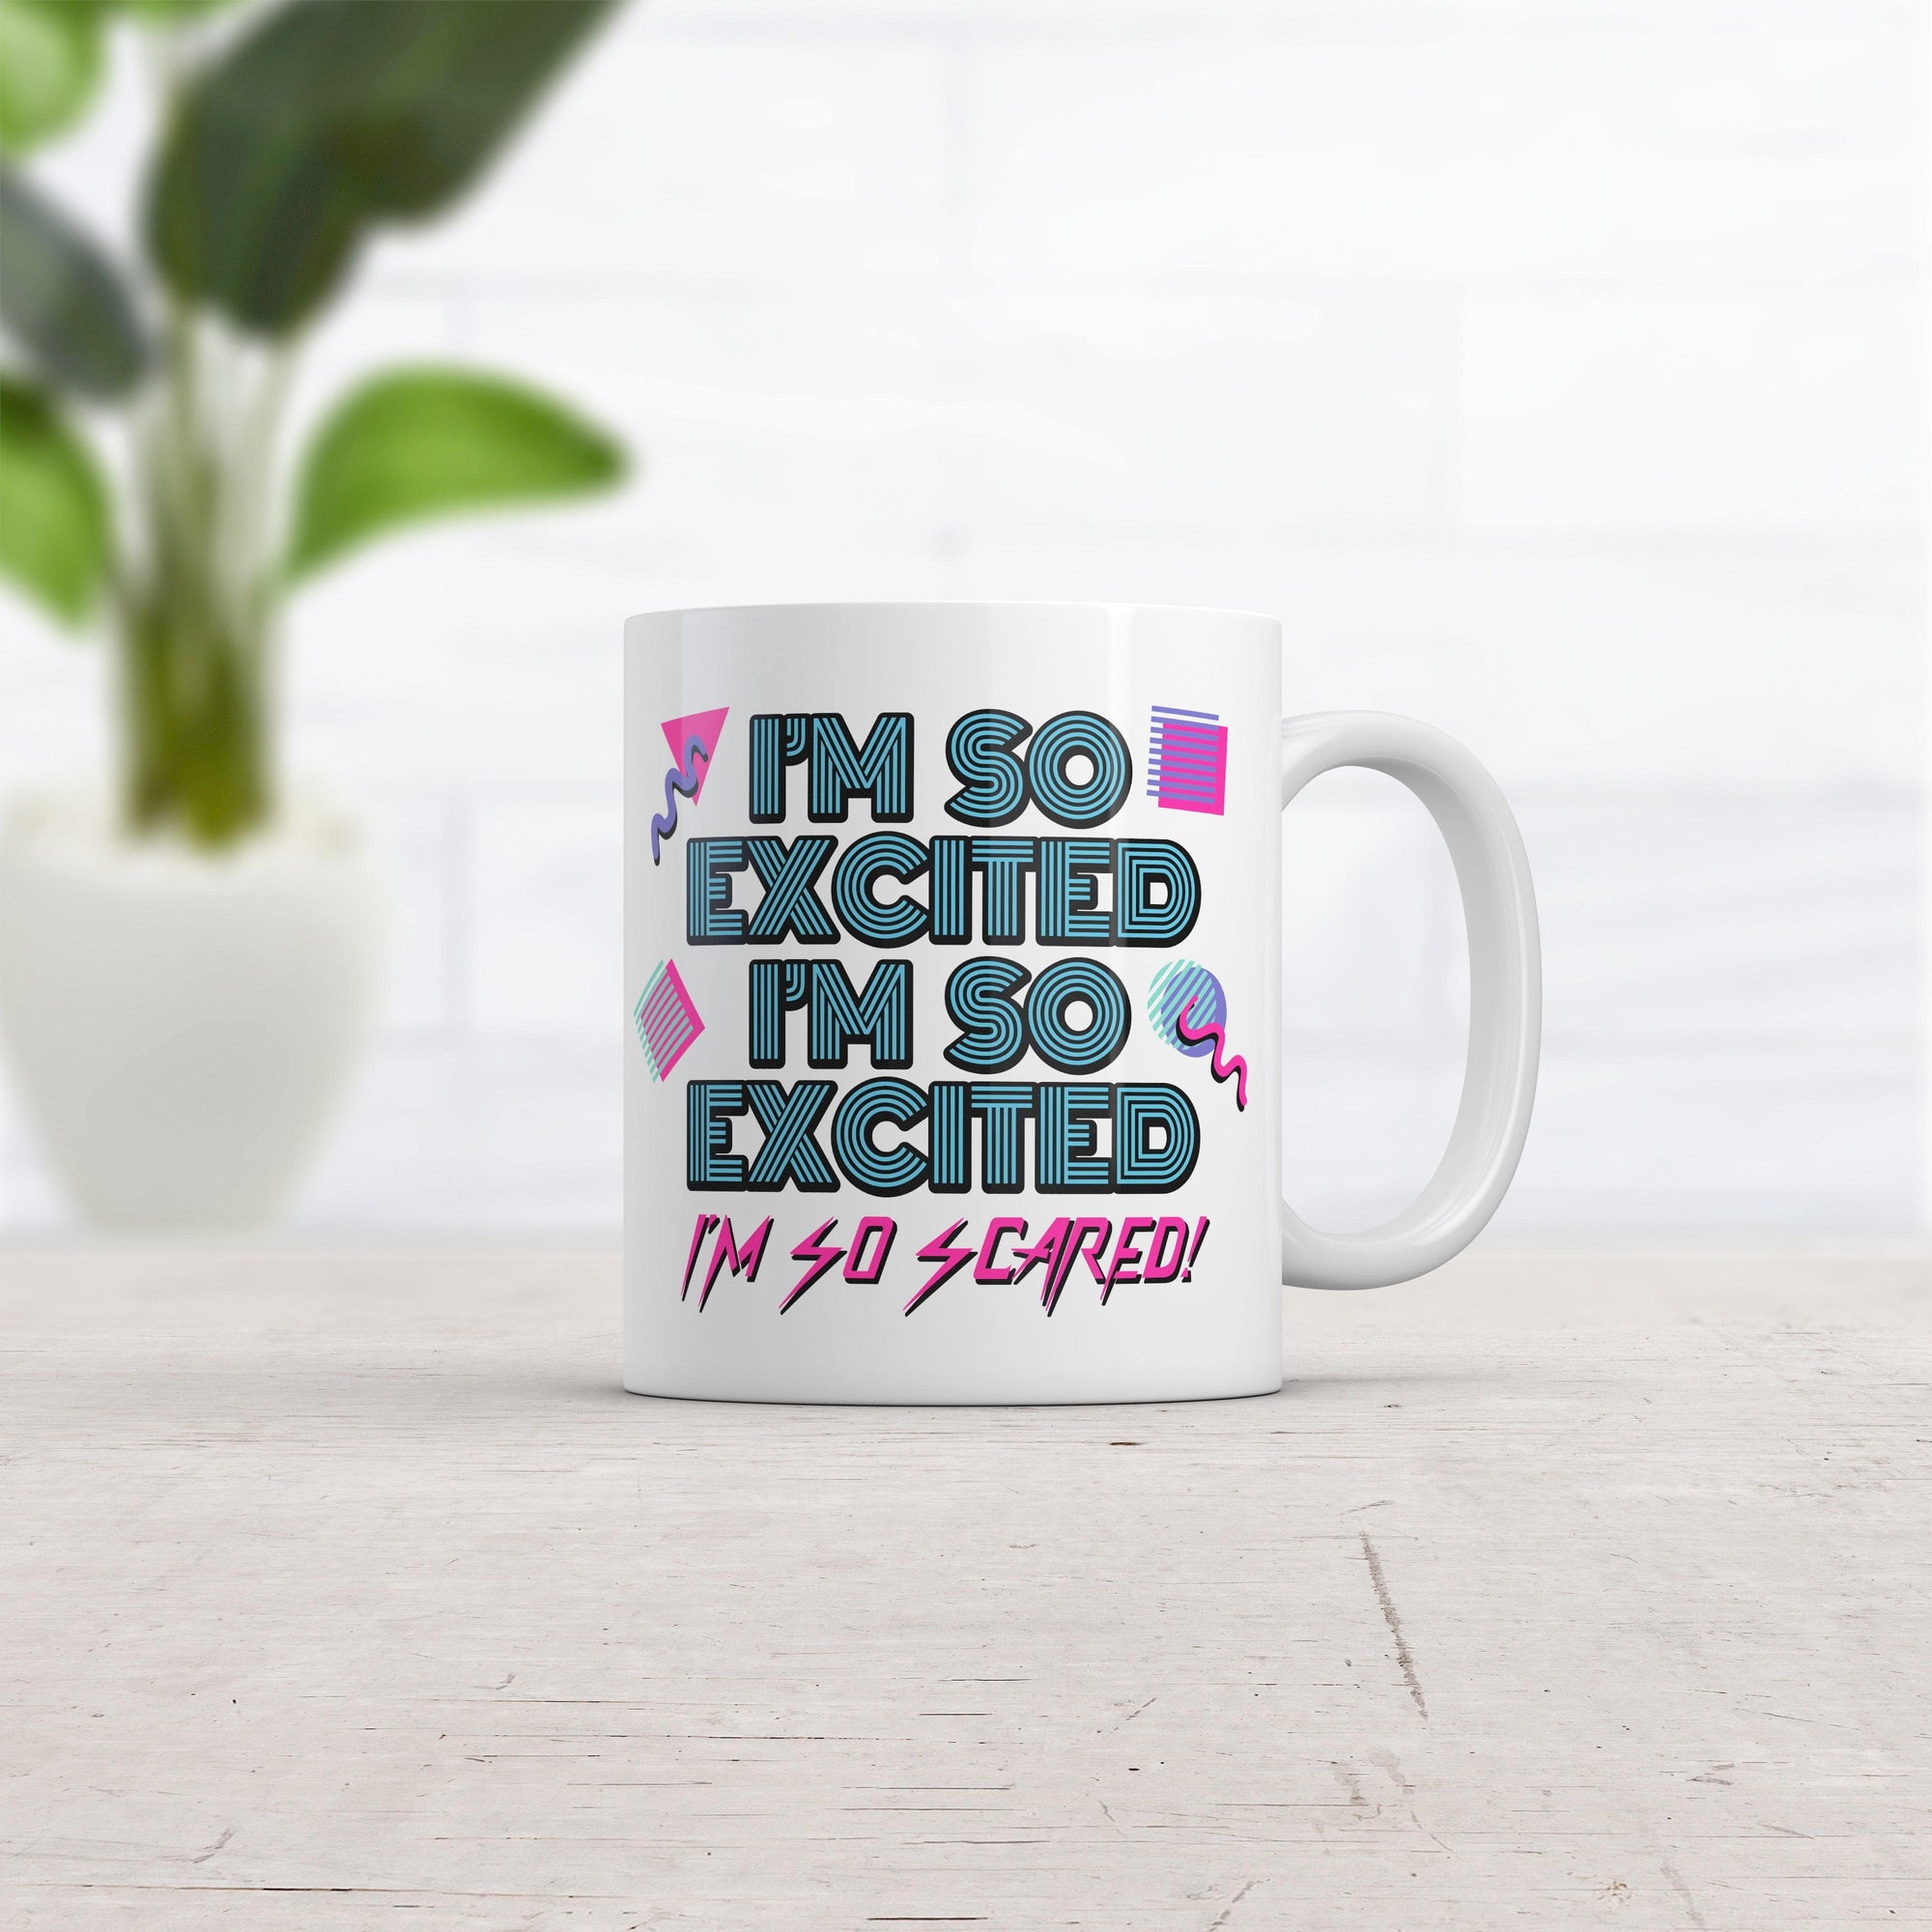 I'm So Excited I'm So Scared Mug Funny Sarcastic Thrilled Panicking Graphic Novelty Coffee Cup-11oz  -  Crazy Dog T-Shirts